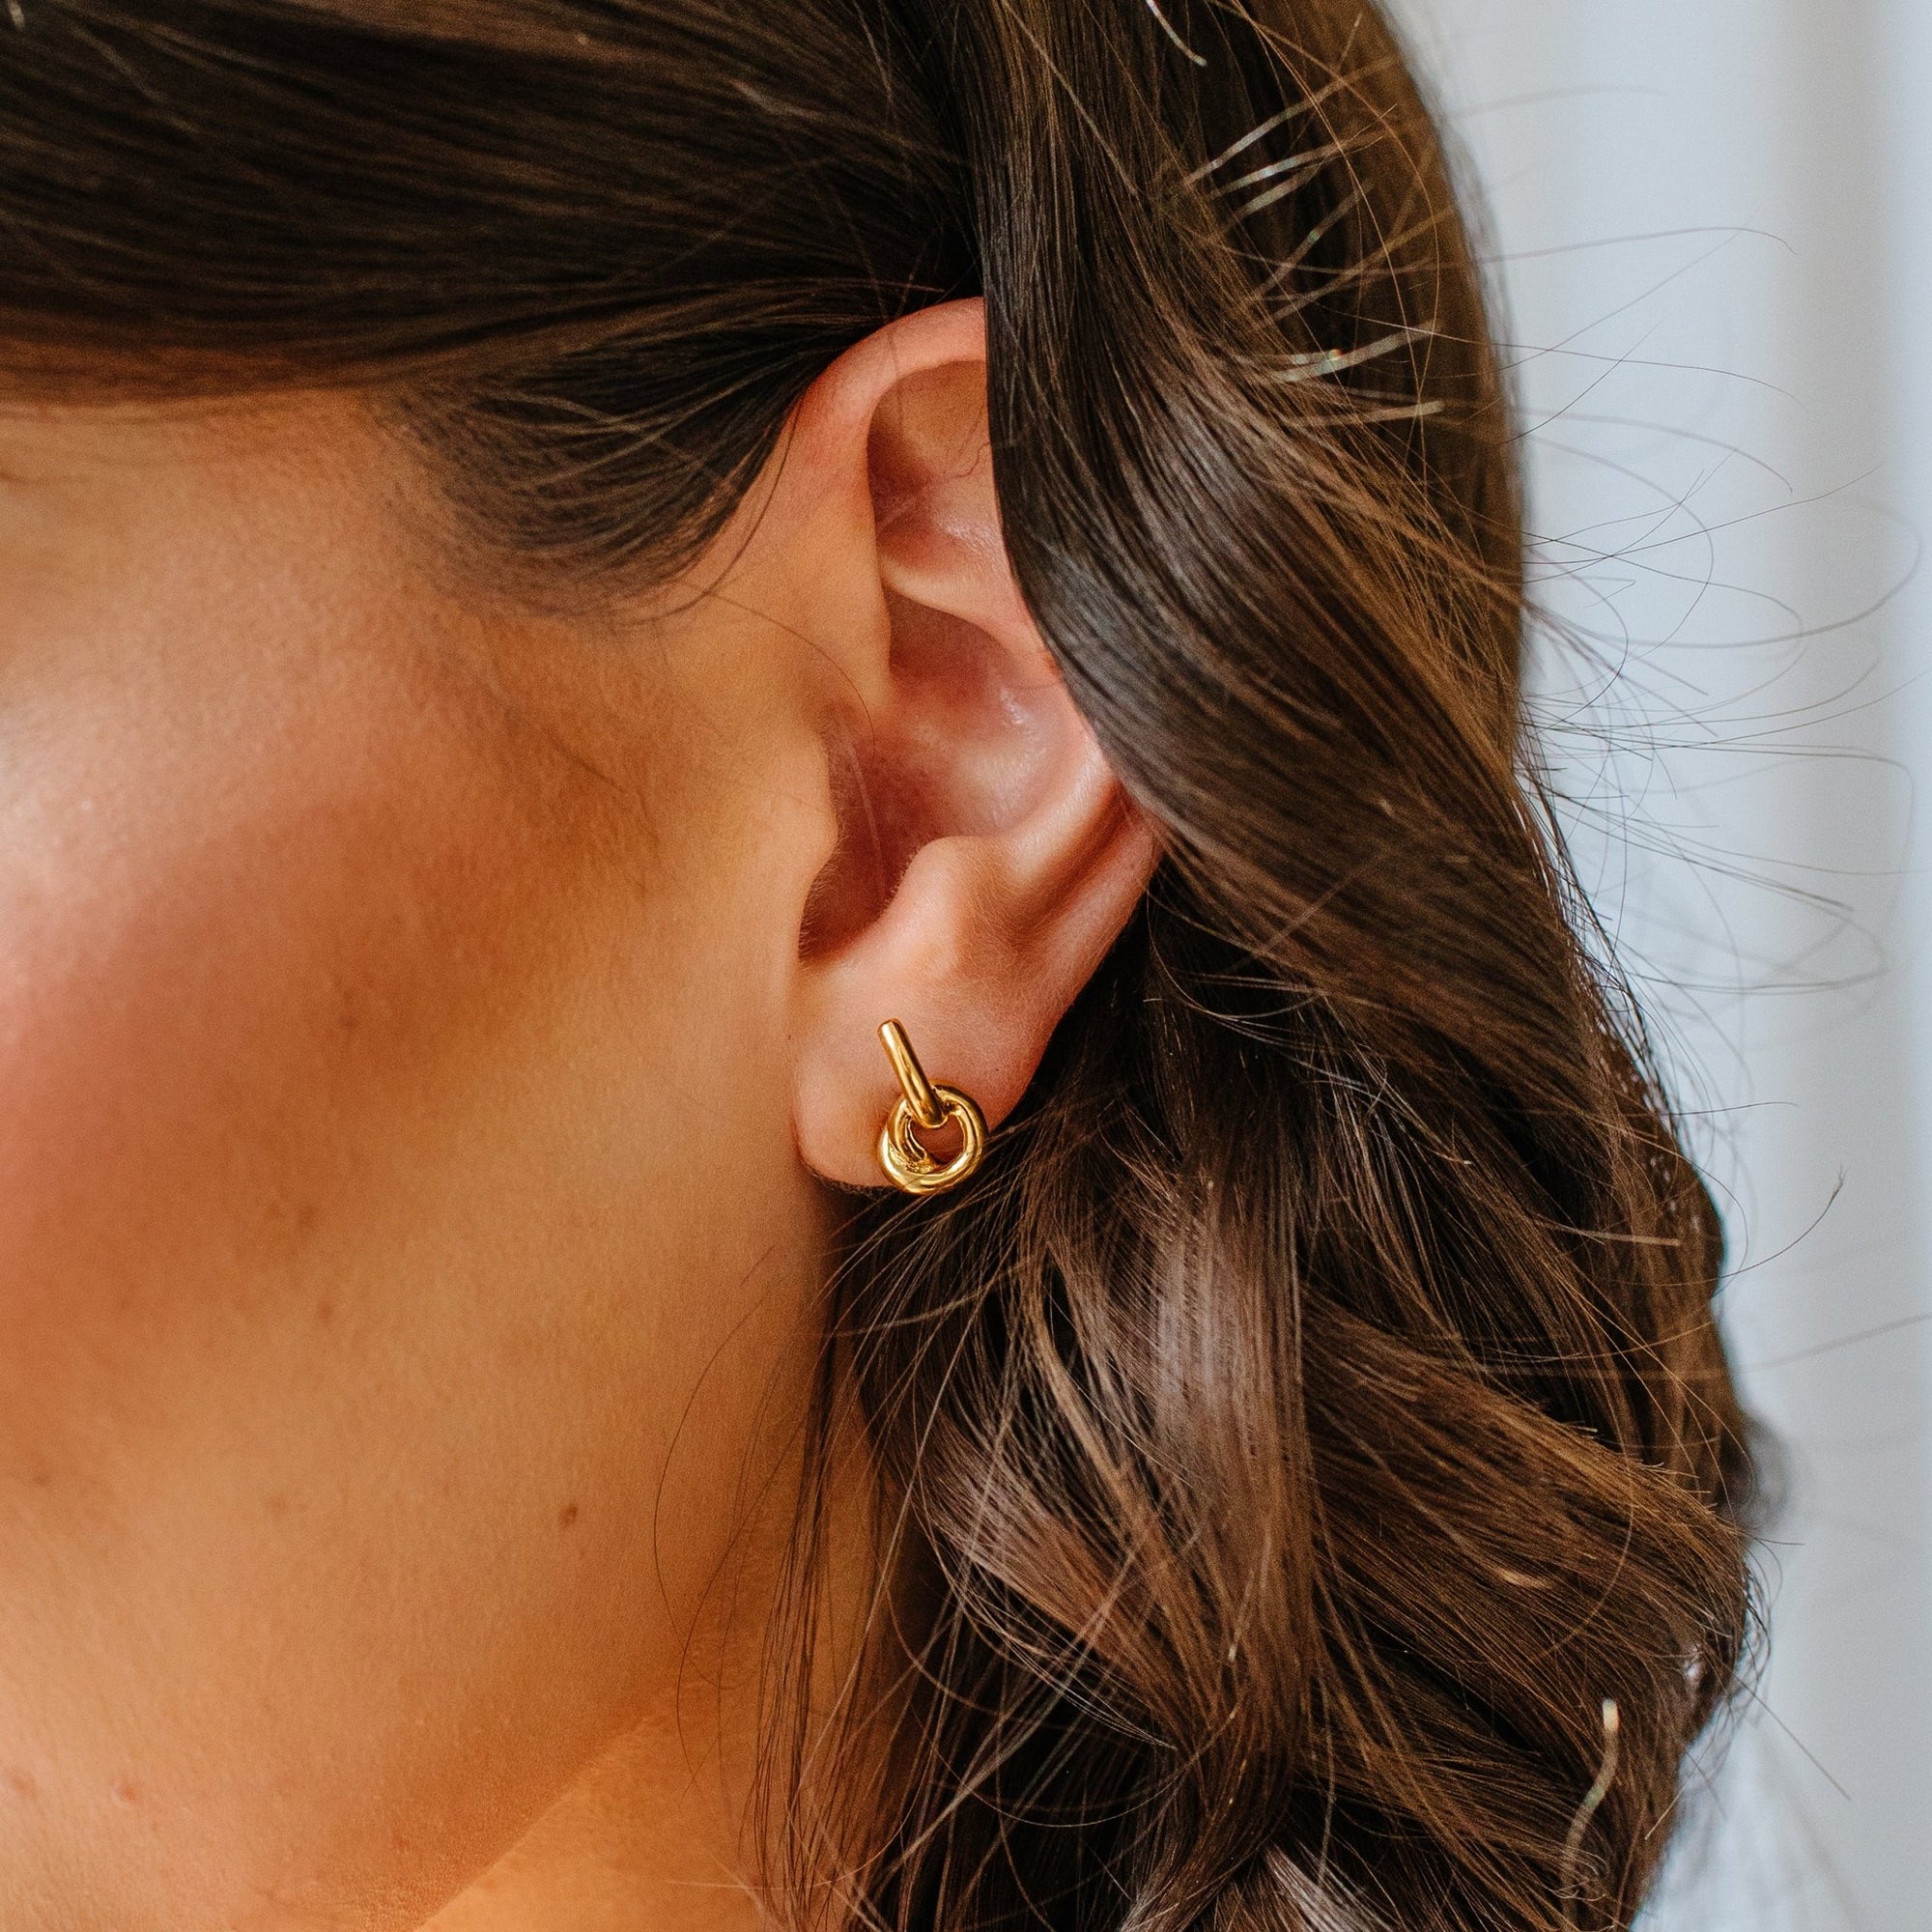 POISE KNOT STUDS - GOLD - SO PRETTY CARA COTTER